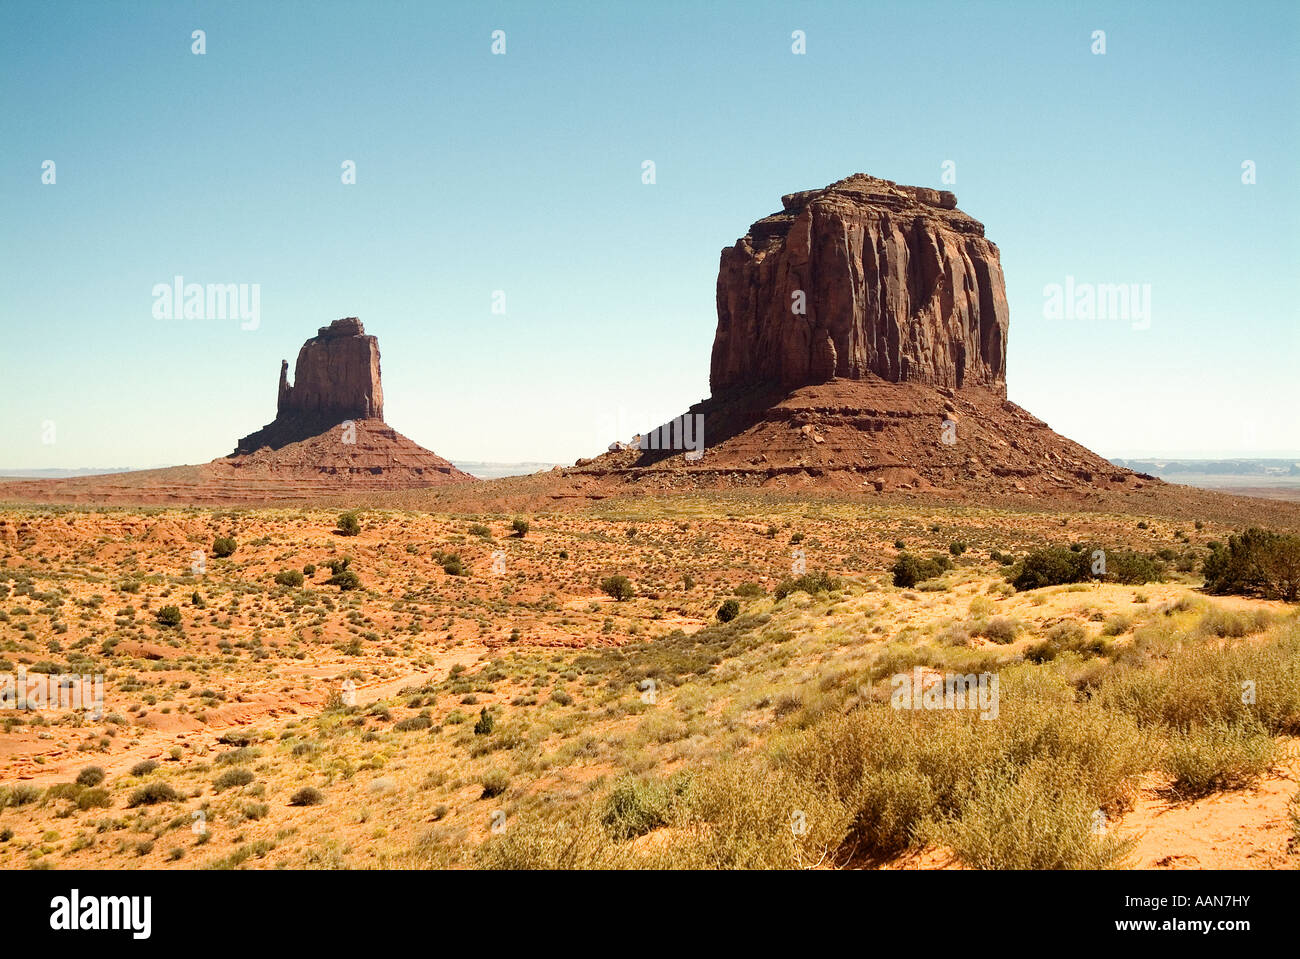 A Mitten Butte and Butte. Monument Valley. Navajo Nation tribal park. Northeastern Arizona and southeastern Utah States. USA Stock Photo